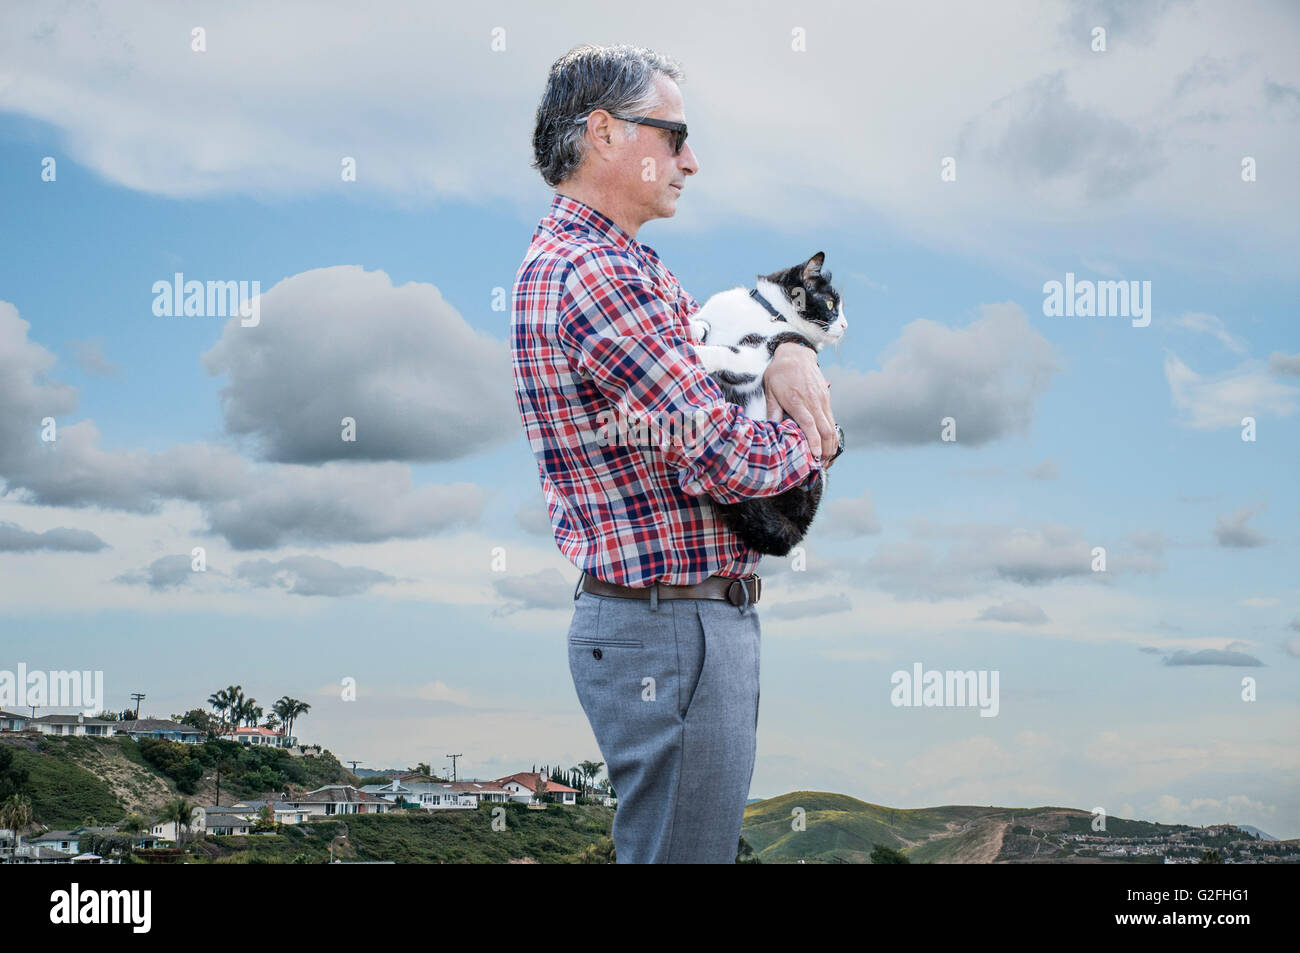 Profile of Man in Sunglasses and Plaid Shirt Holding Cat Stock Photo